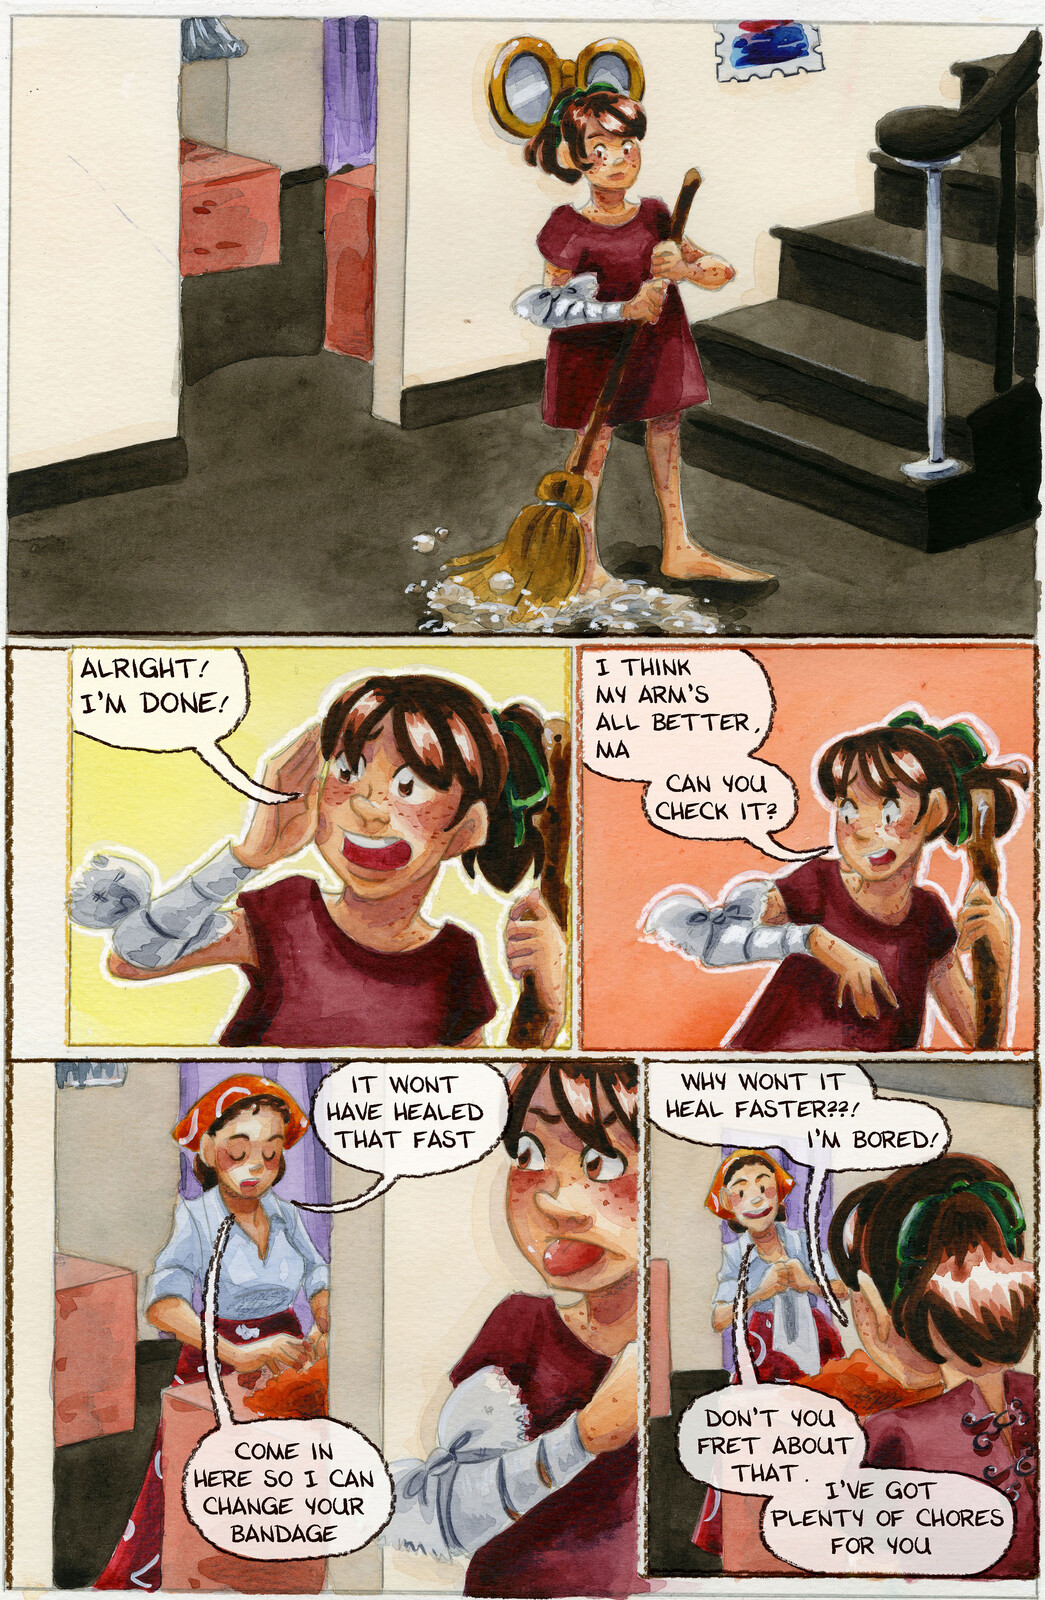 Sample Comic Page from Chapter 8 of 7" Kara